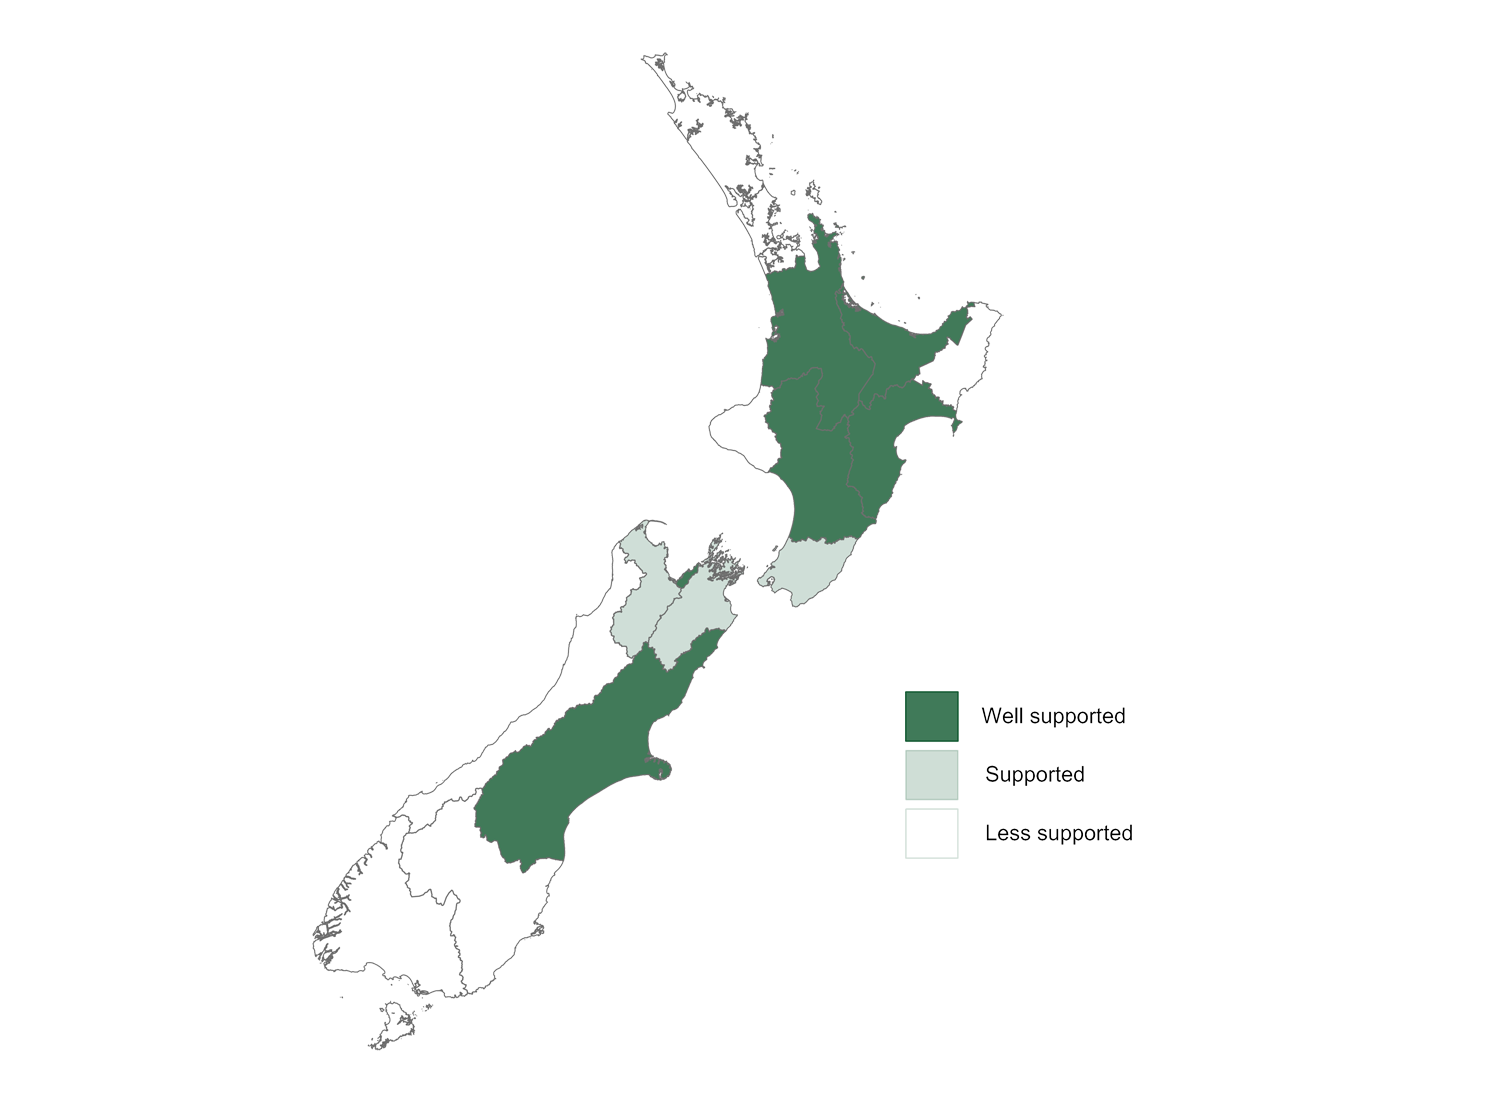 New Zealand map highlighting the best regions for commercial Hemp growing.